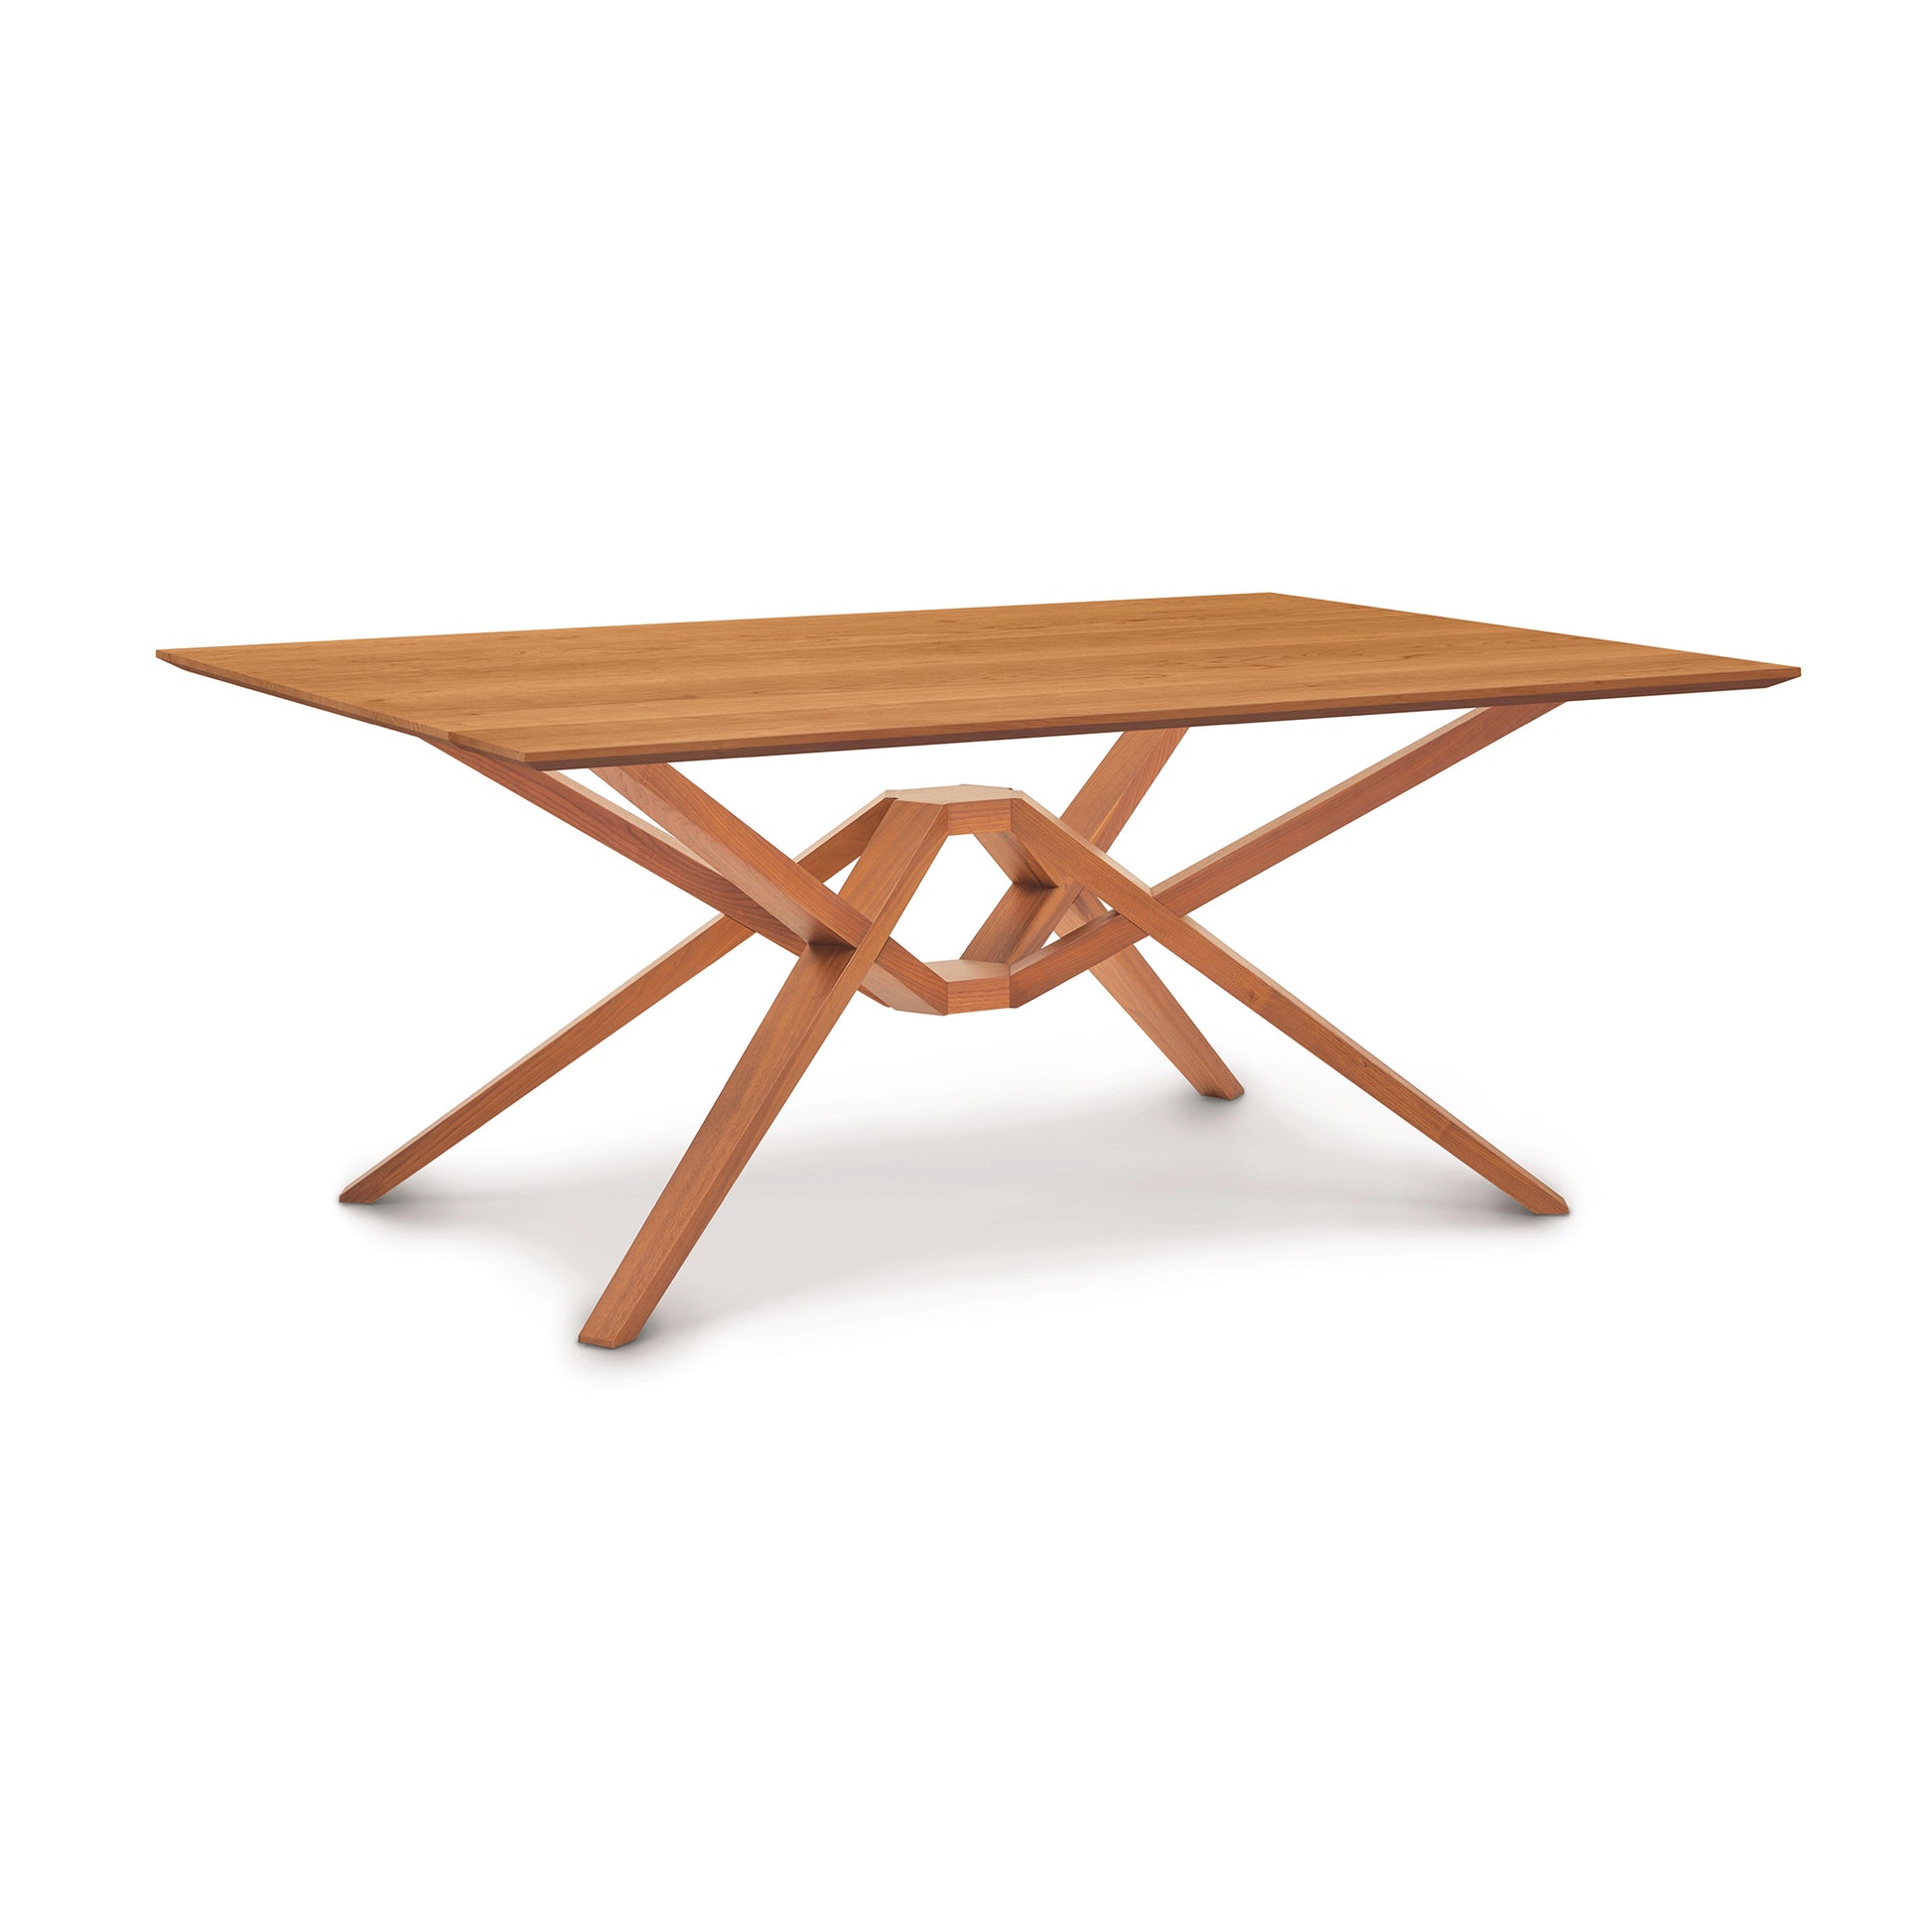 A Copeland Furniture Exeter Solid Top Dining Table with a unique intersecting leg design on a white background, crafted from sustainably harvested solid North American hardwood.